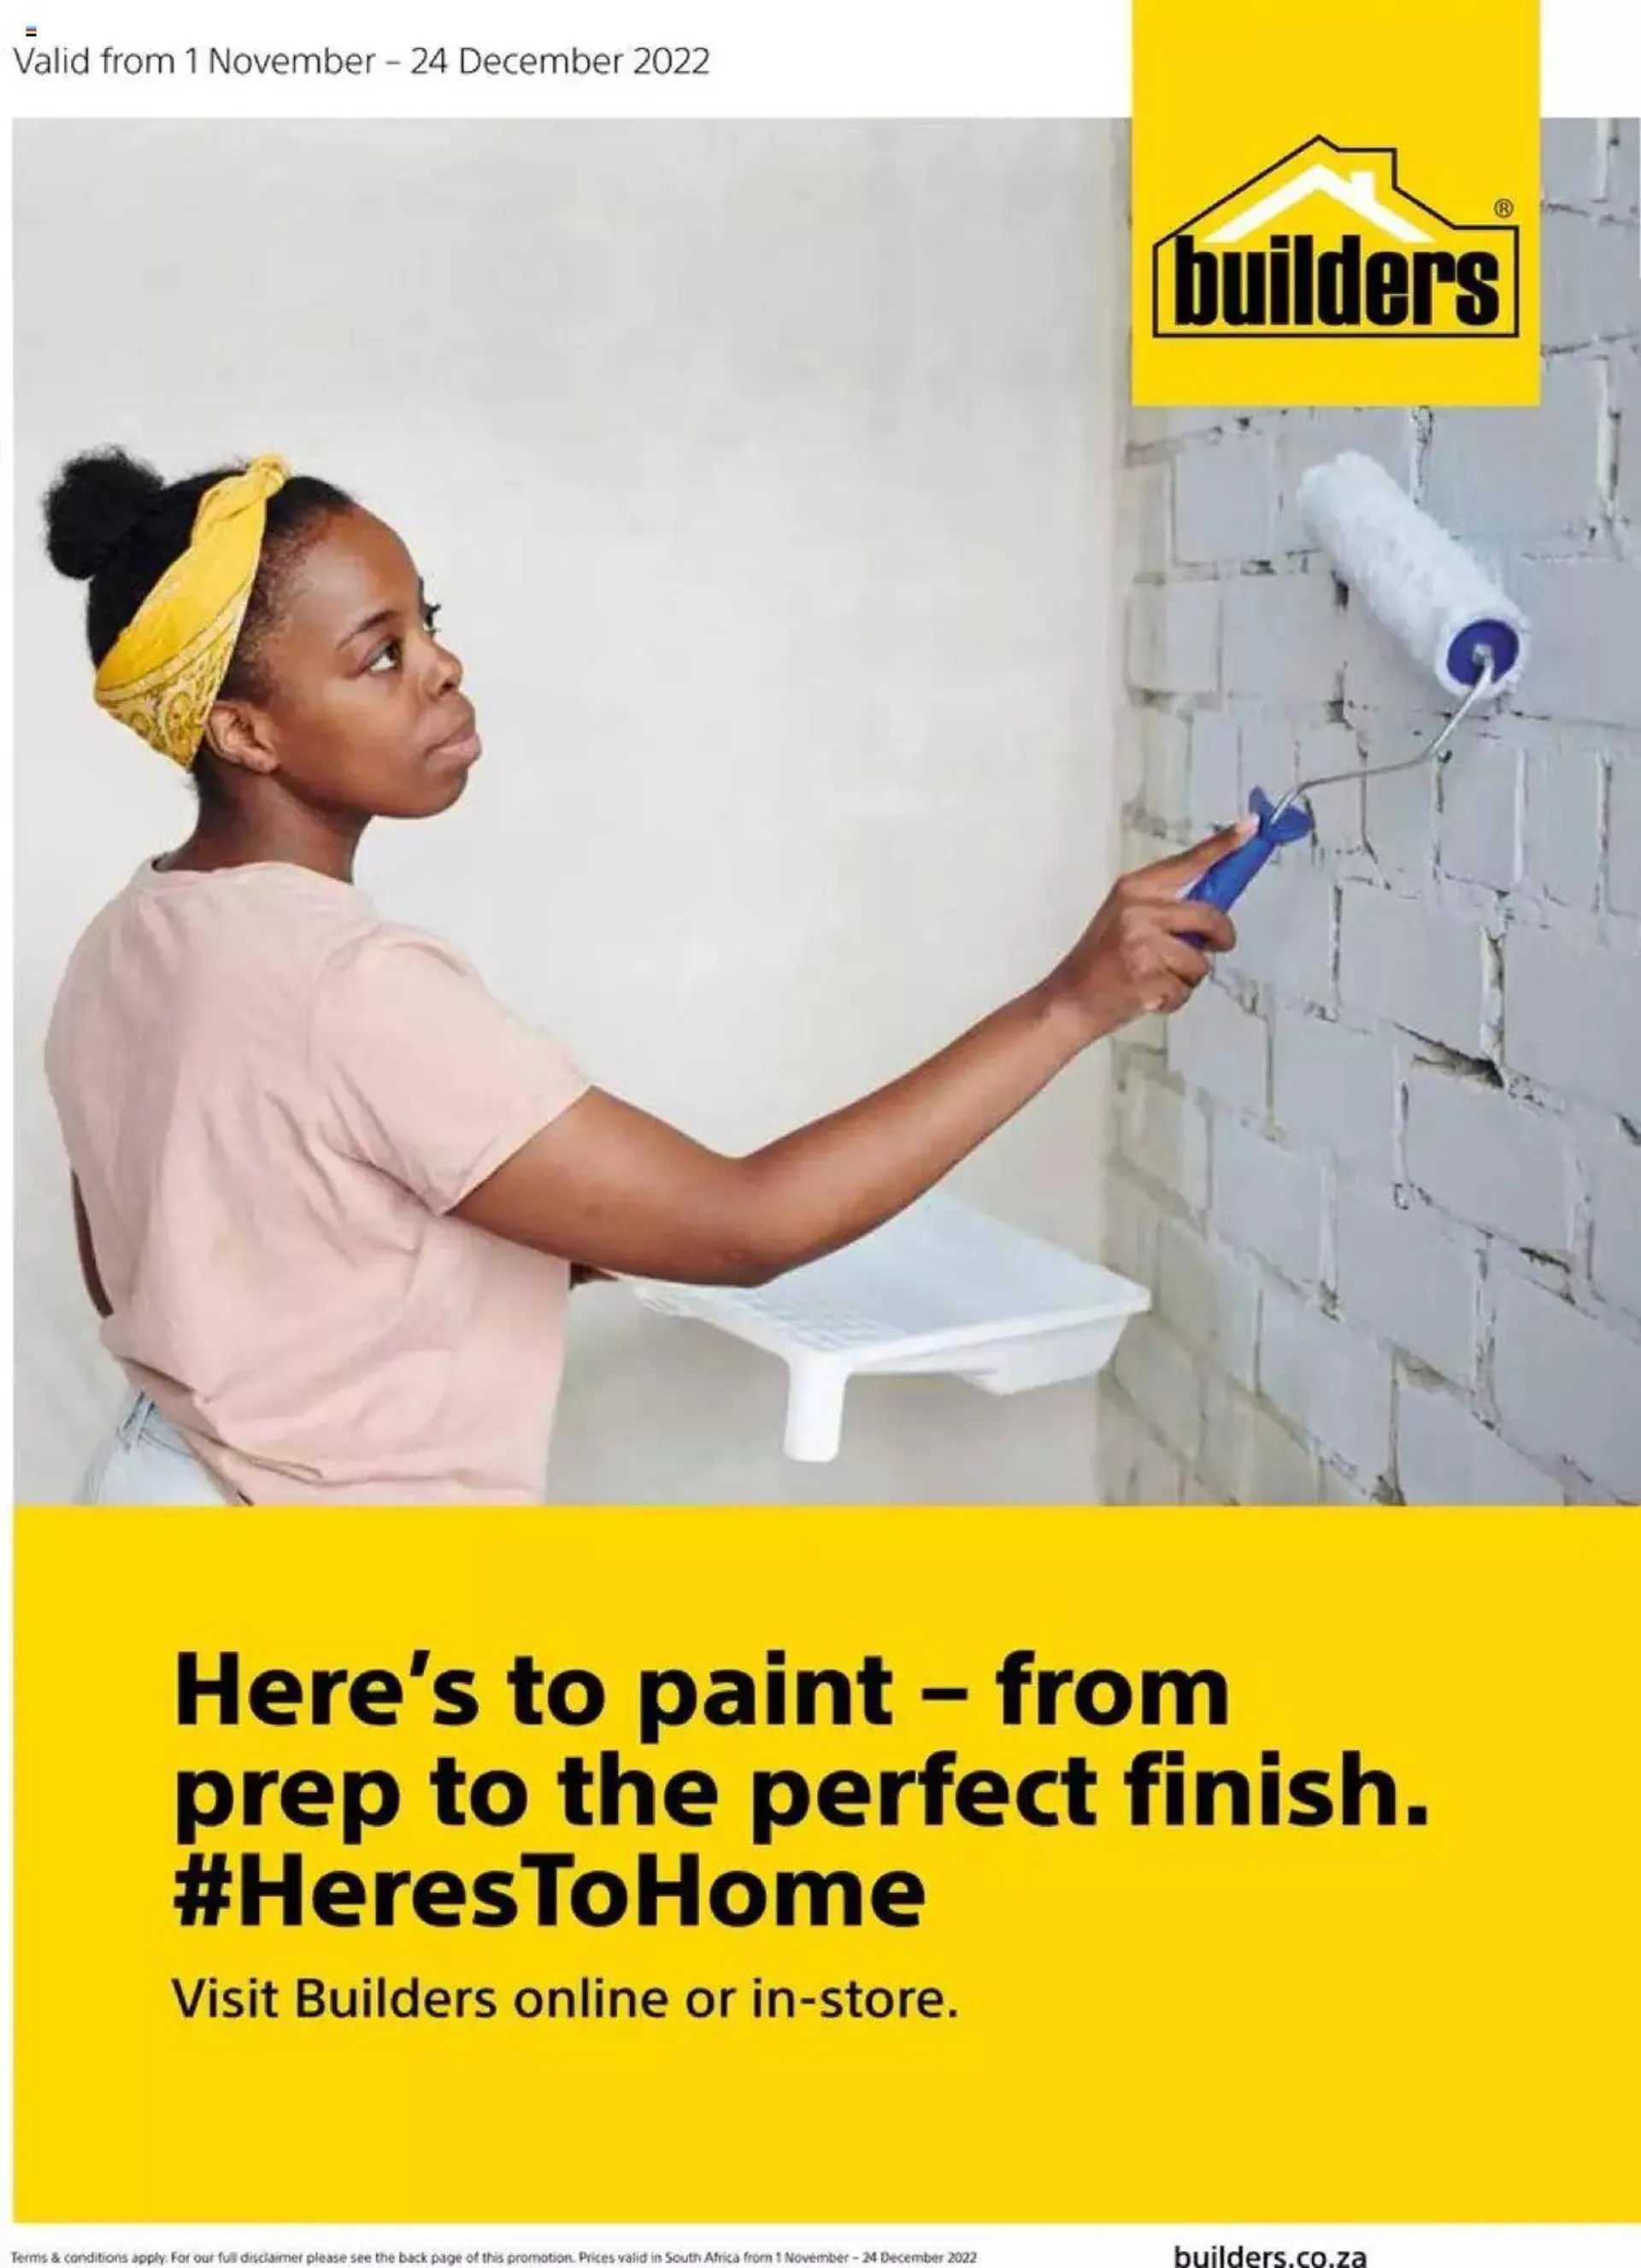 Builders - Heres To Paint - From Prep To The Perfect Finish - 0